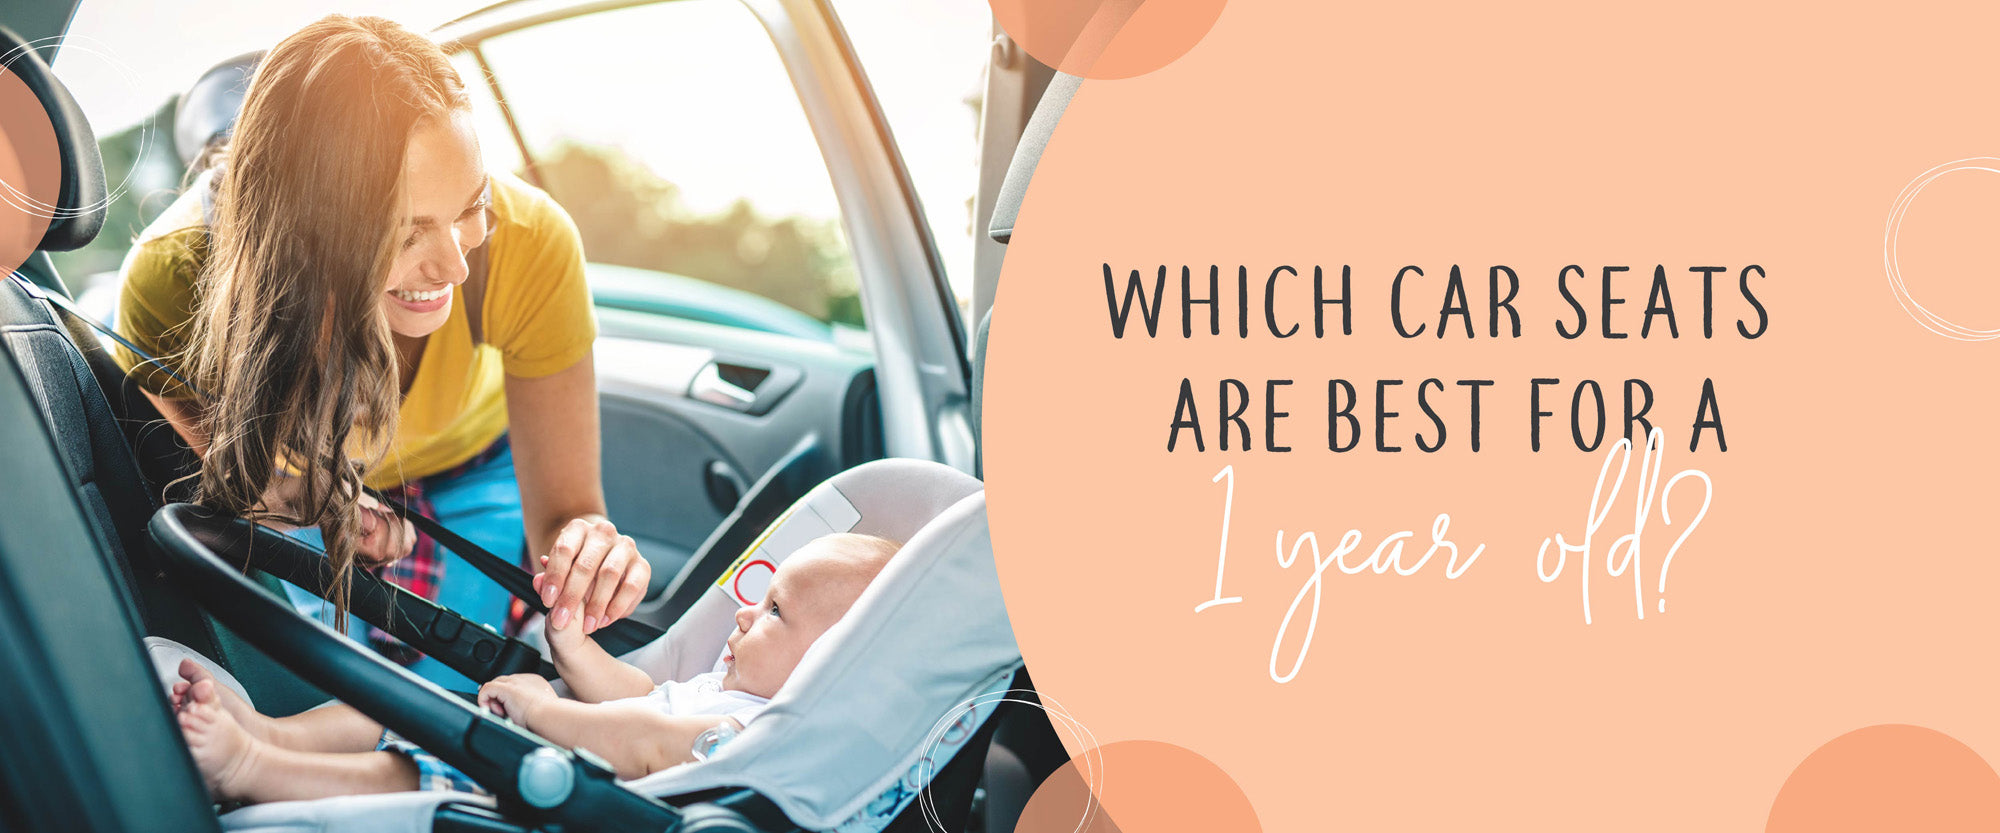 Which car seats are best for a 1 year old?